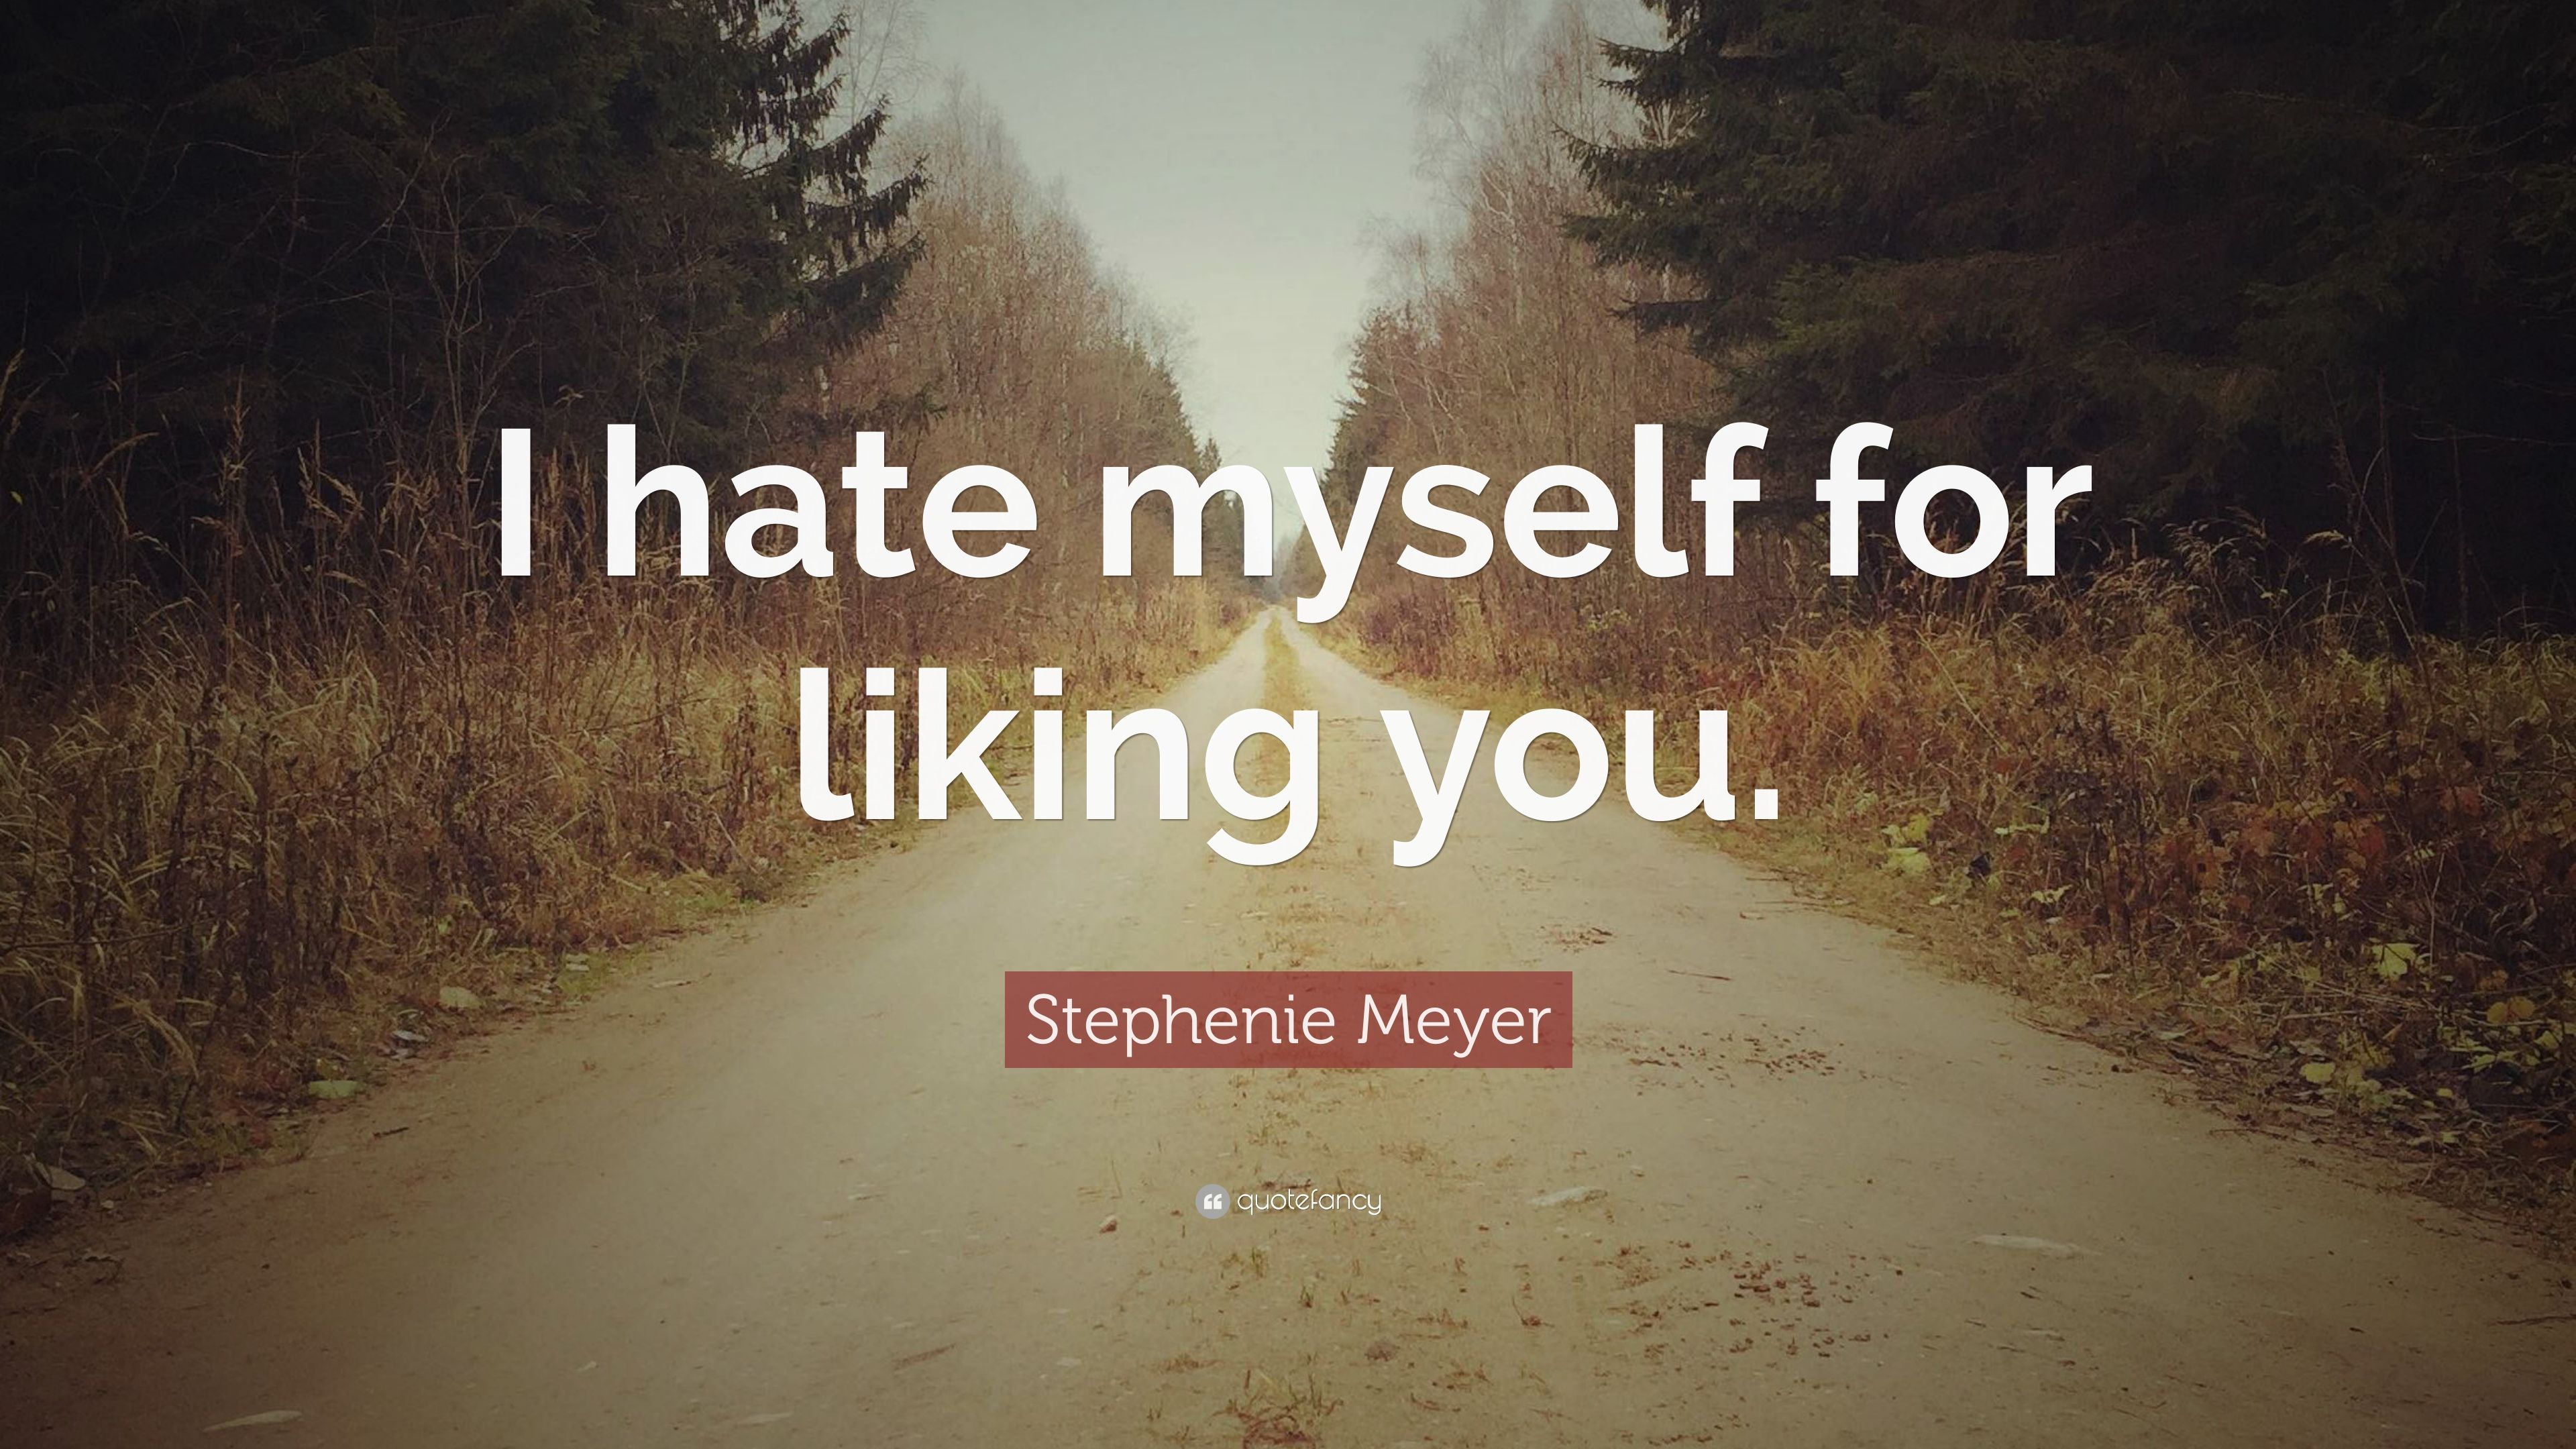 Stephenie Meyer Quote: “I hate myself for liking you.” 11